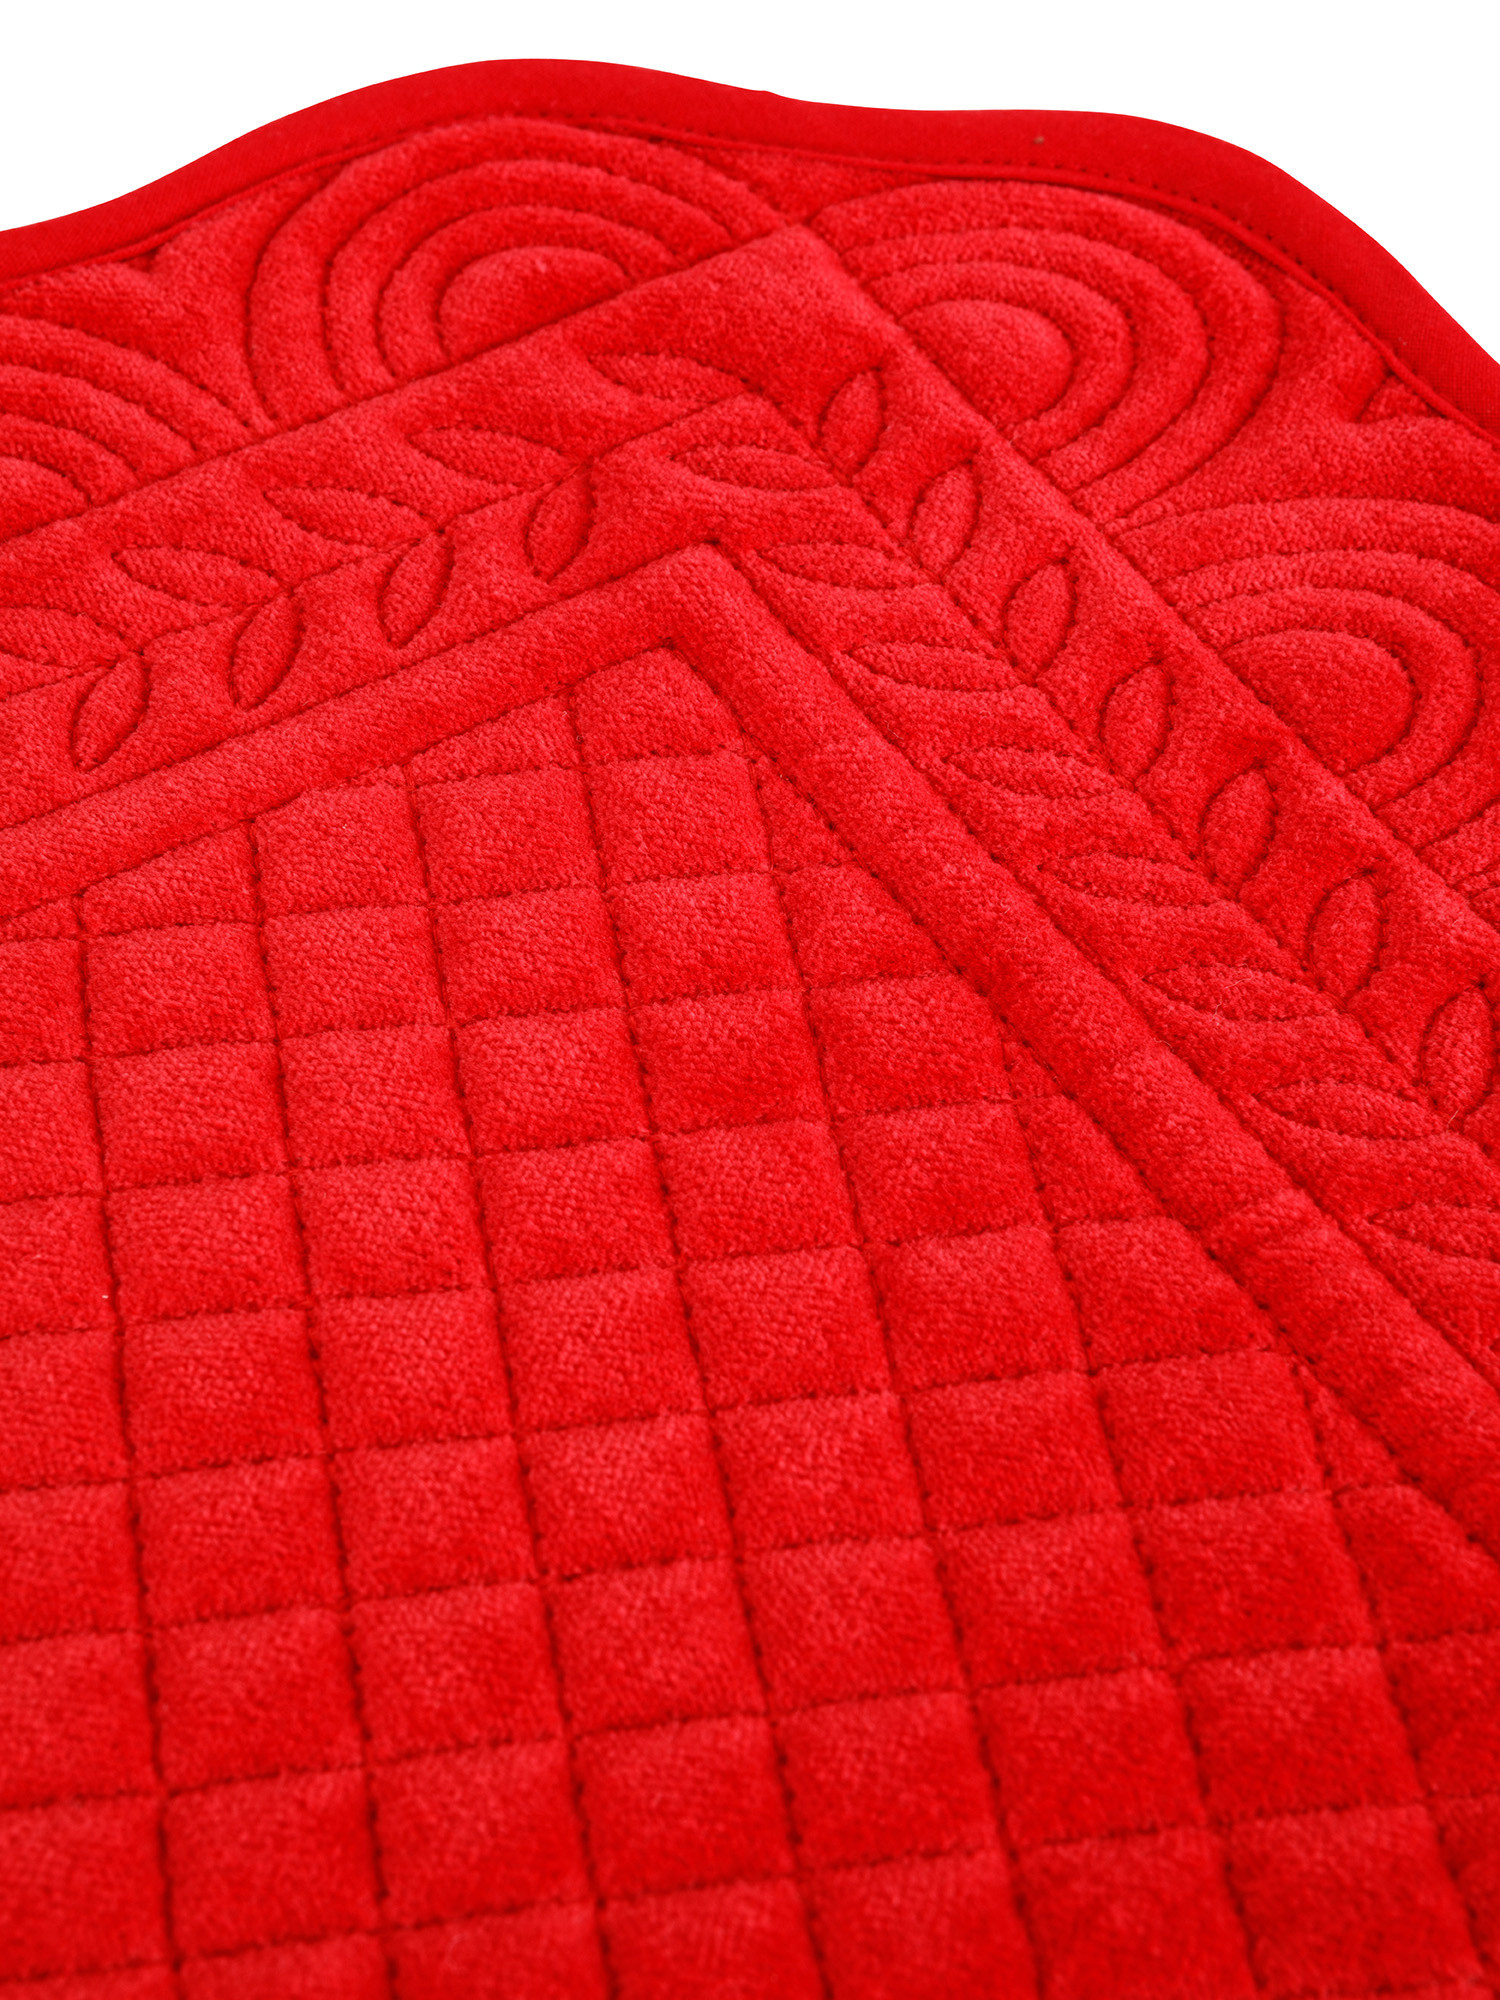 Plain color cotton velvet quilted placemat, Red, large image number 1